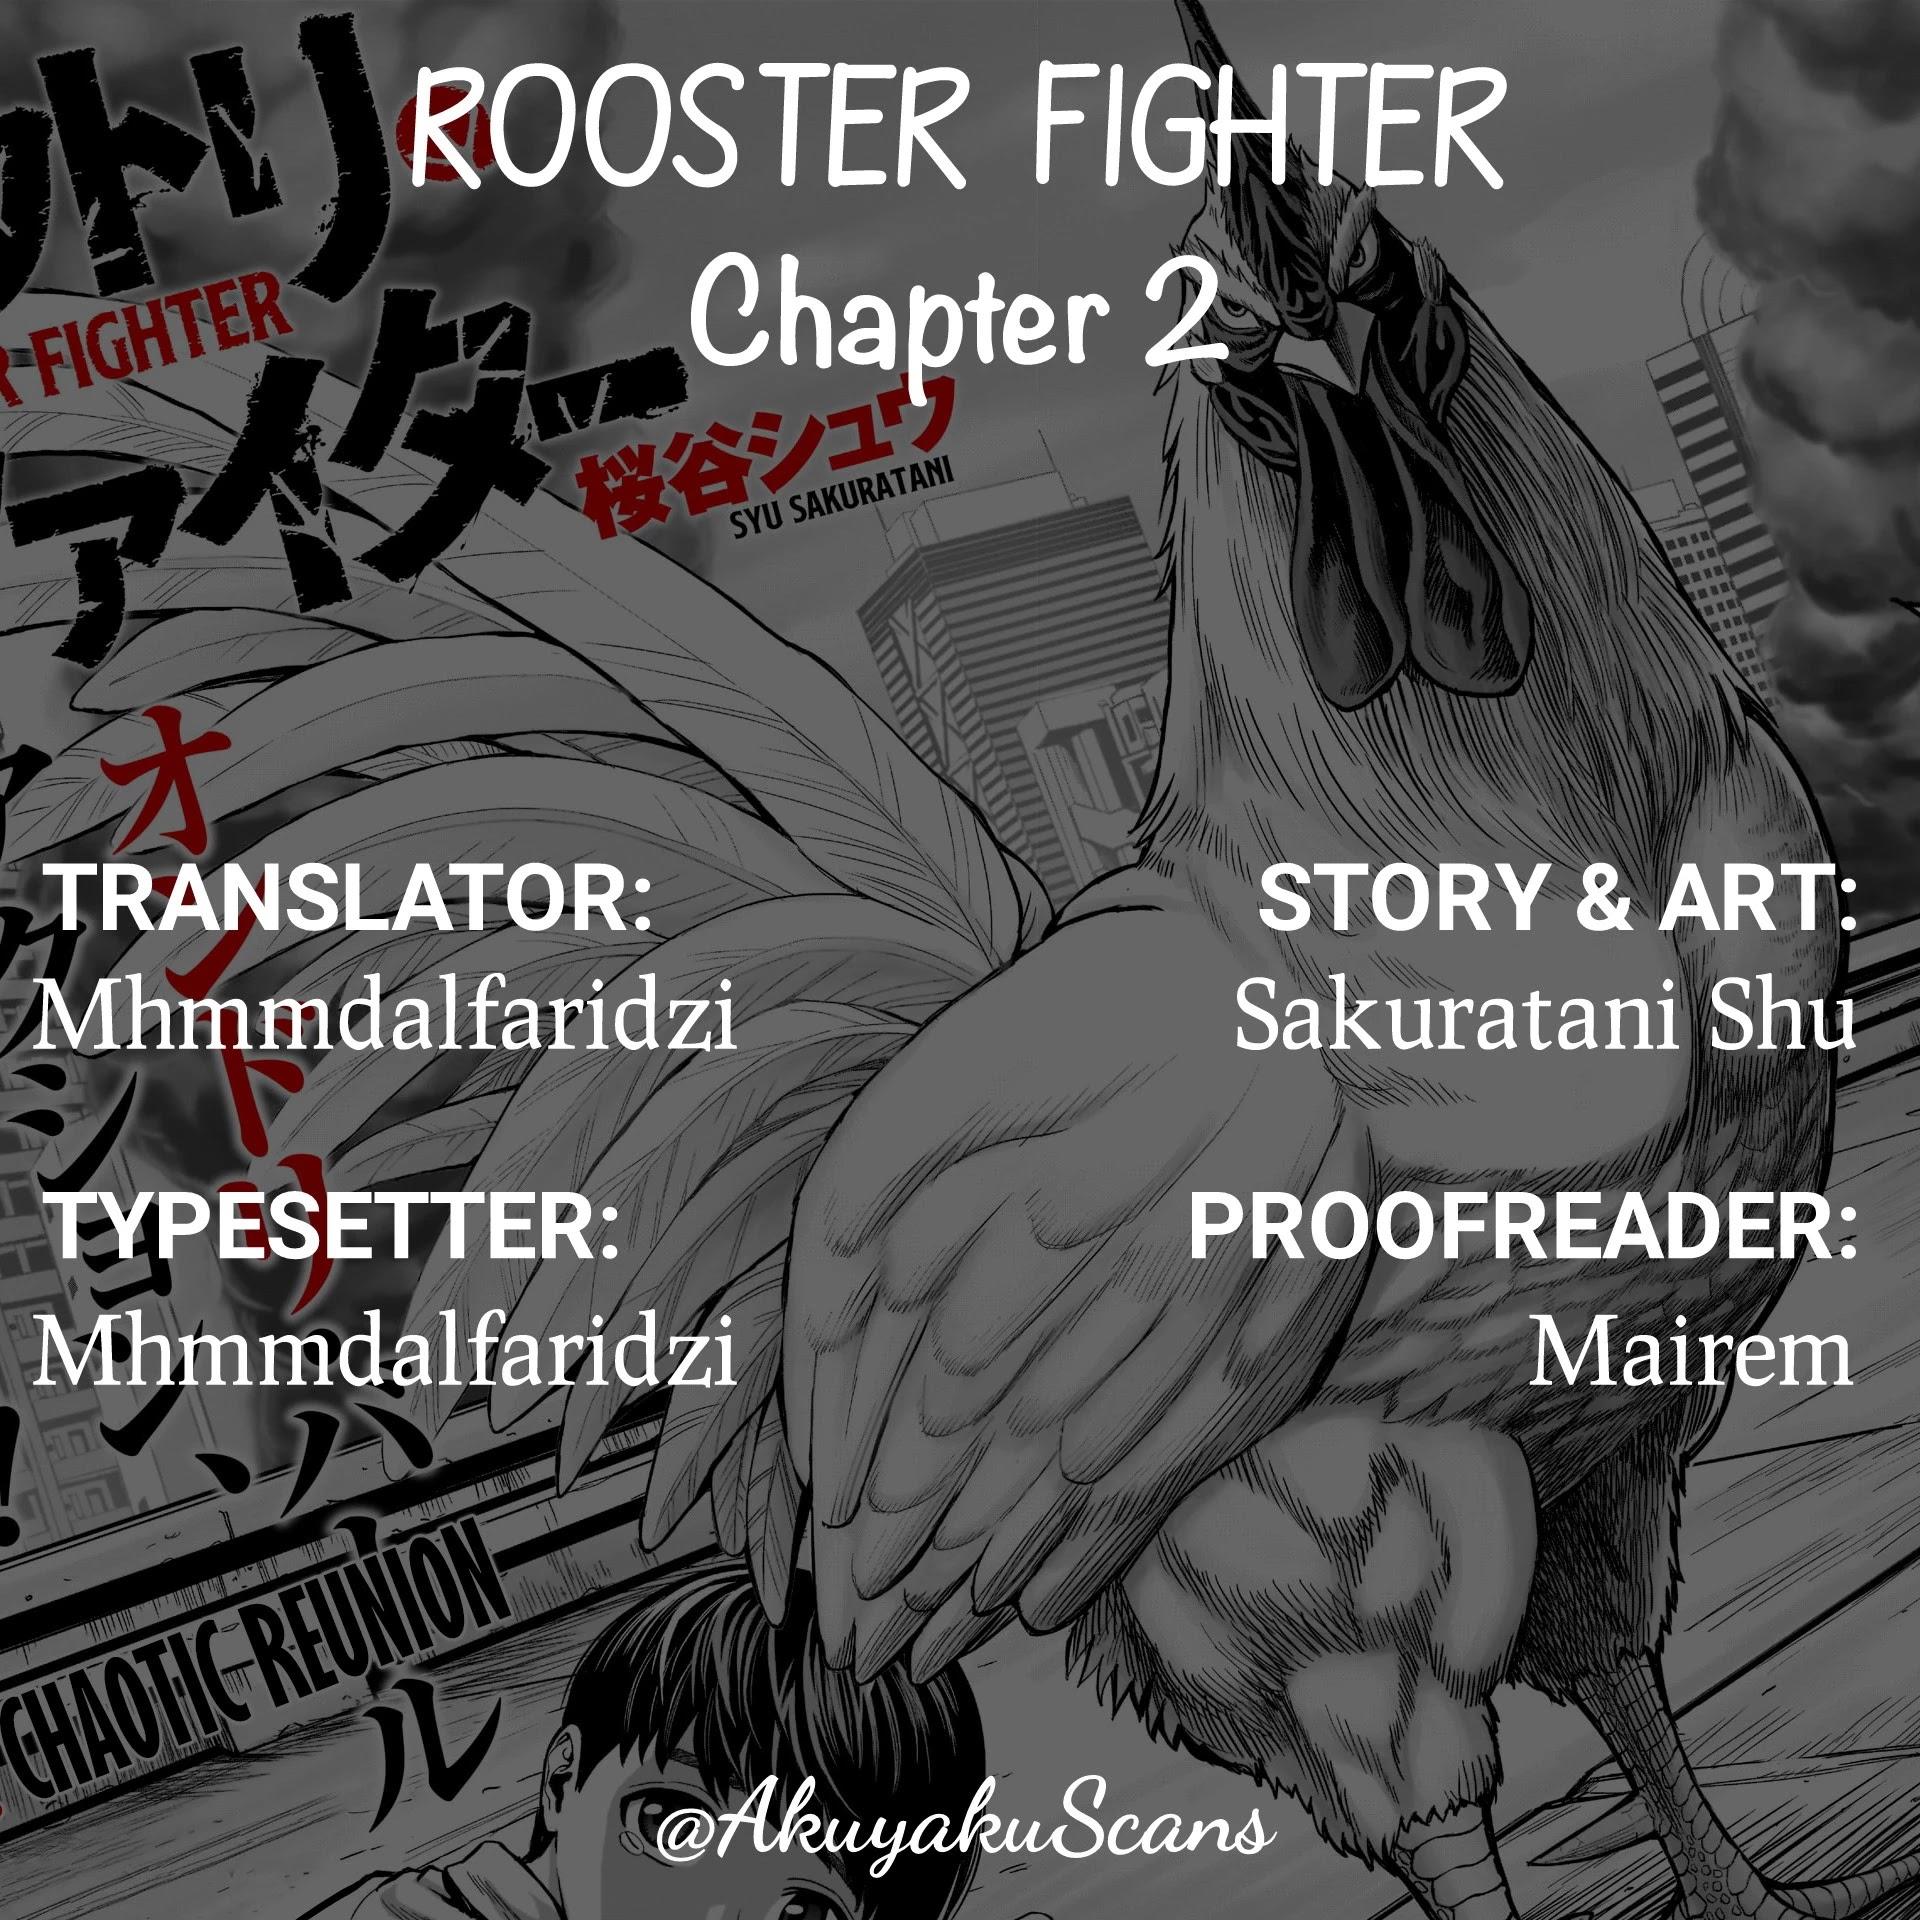 Rooster Fighter Manga  Anime  Grupo Oficial